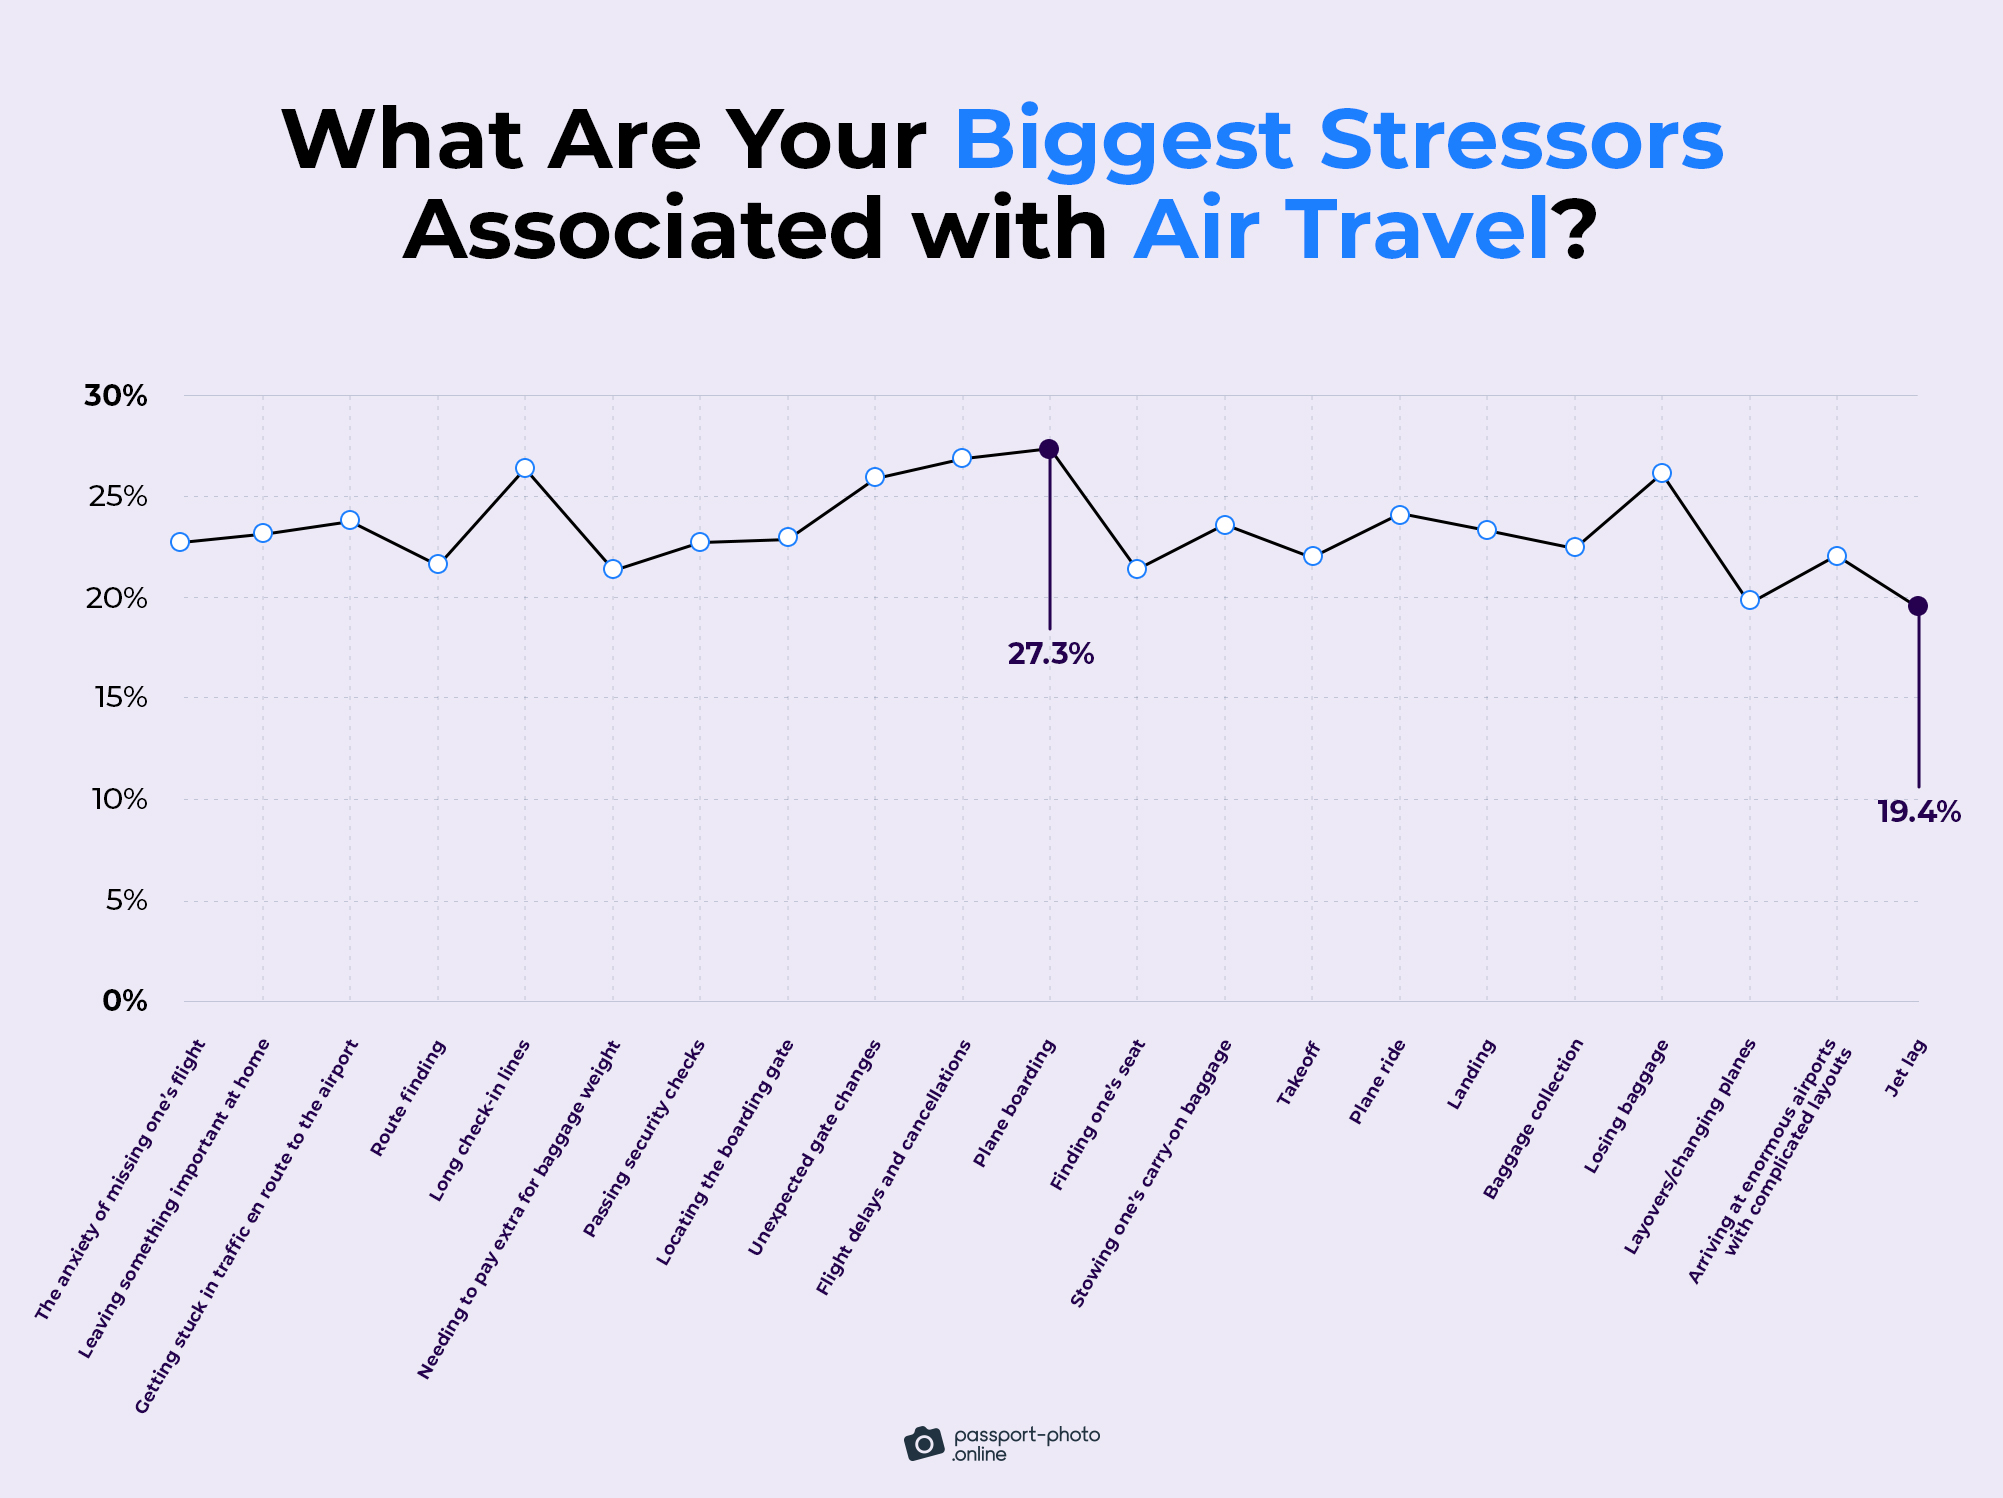 plane boarding is the most stressful (27.3%) part of air travel